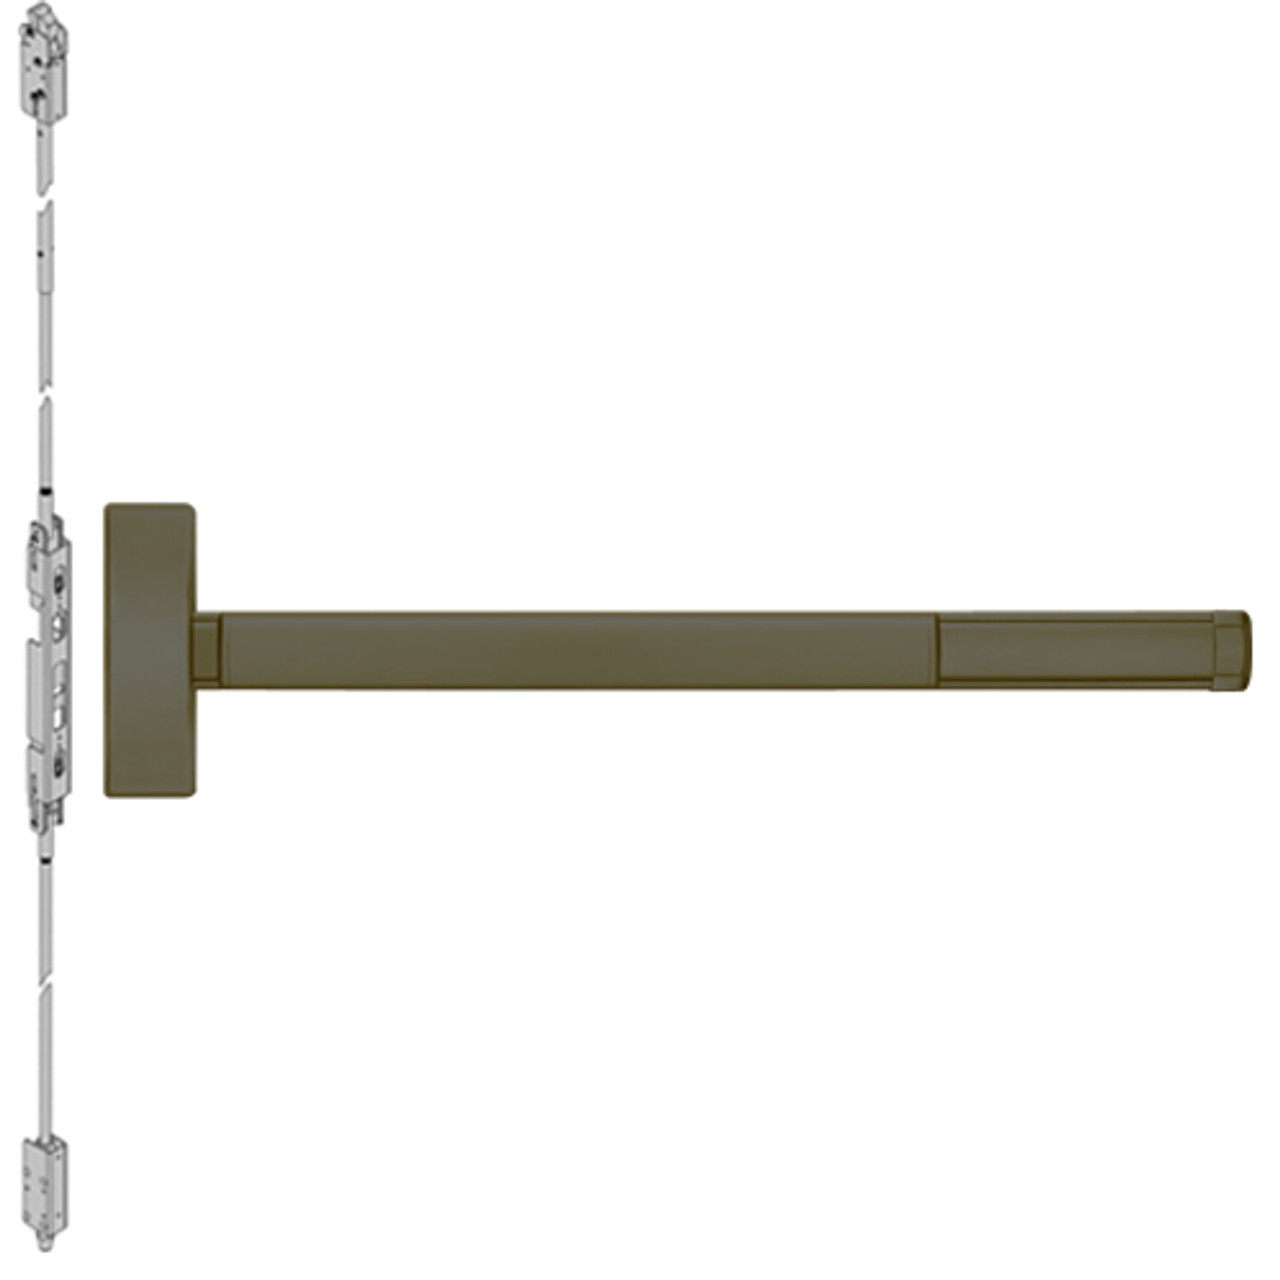 2803LBR-613-48 PHI 2800 Series Non Fire Rated Concealed Vertical Rod Exit Device Prepped for Key Retracts Latchbolt in Oil Rubbed Bronze Finish